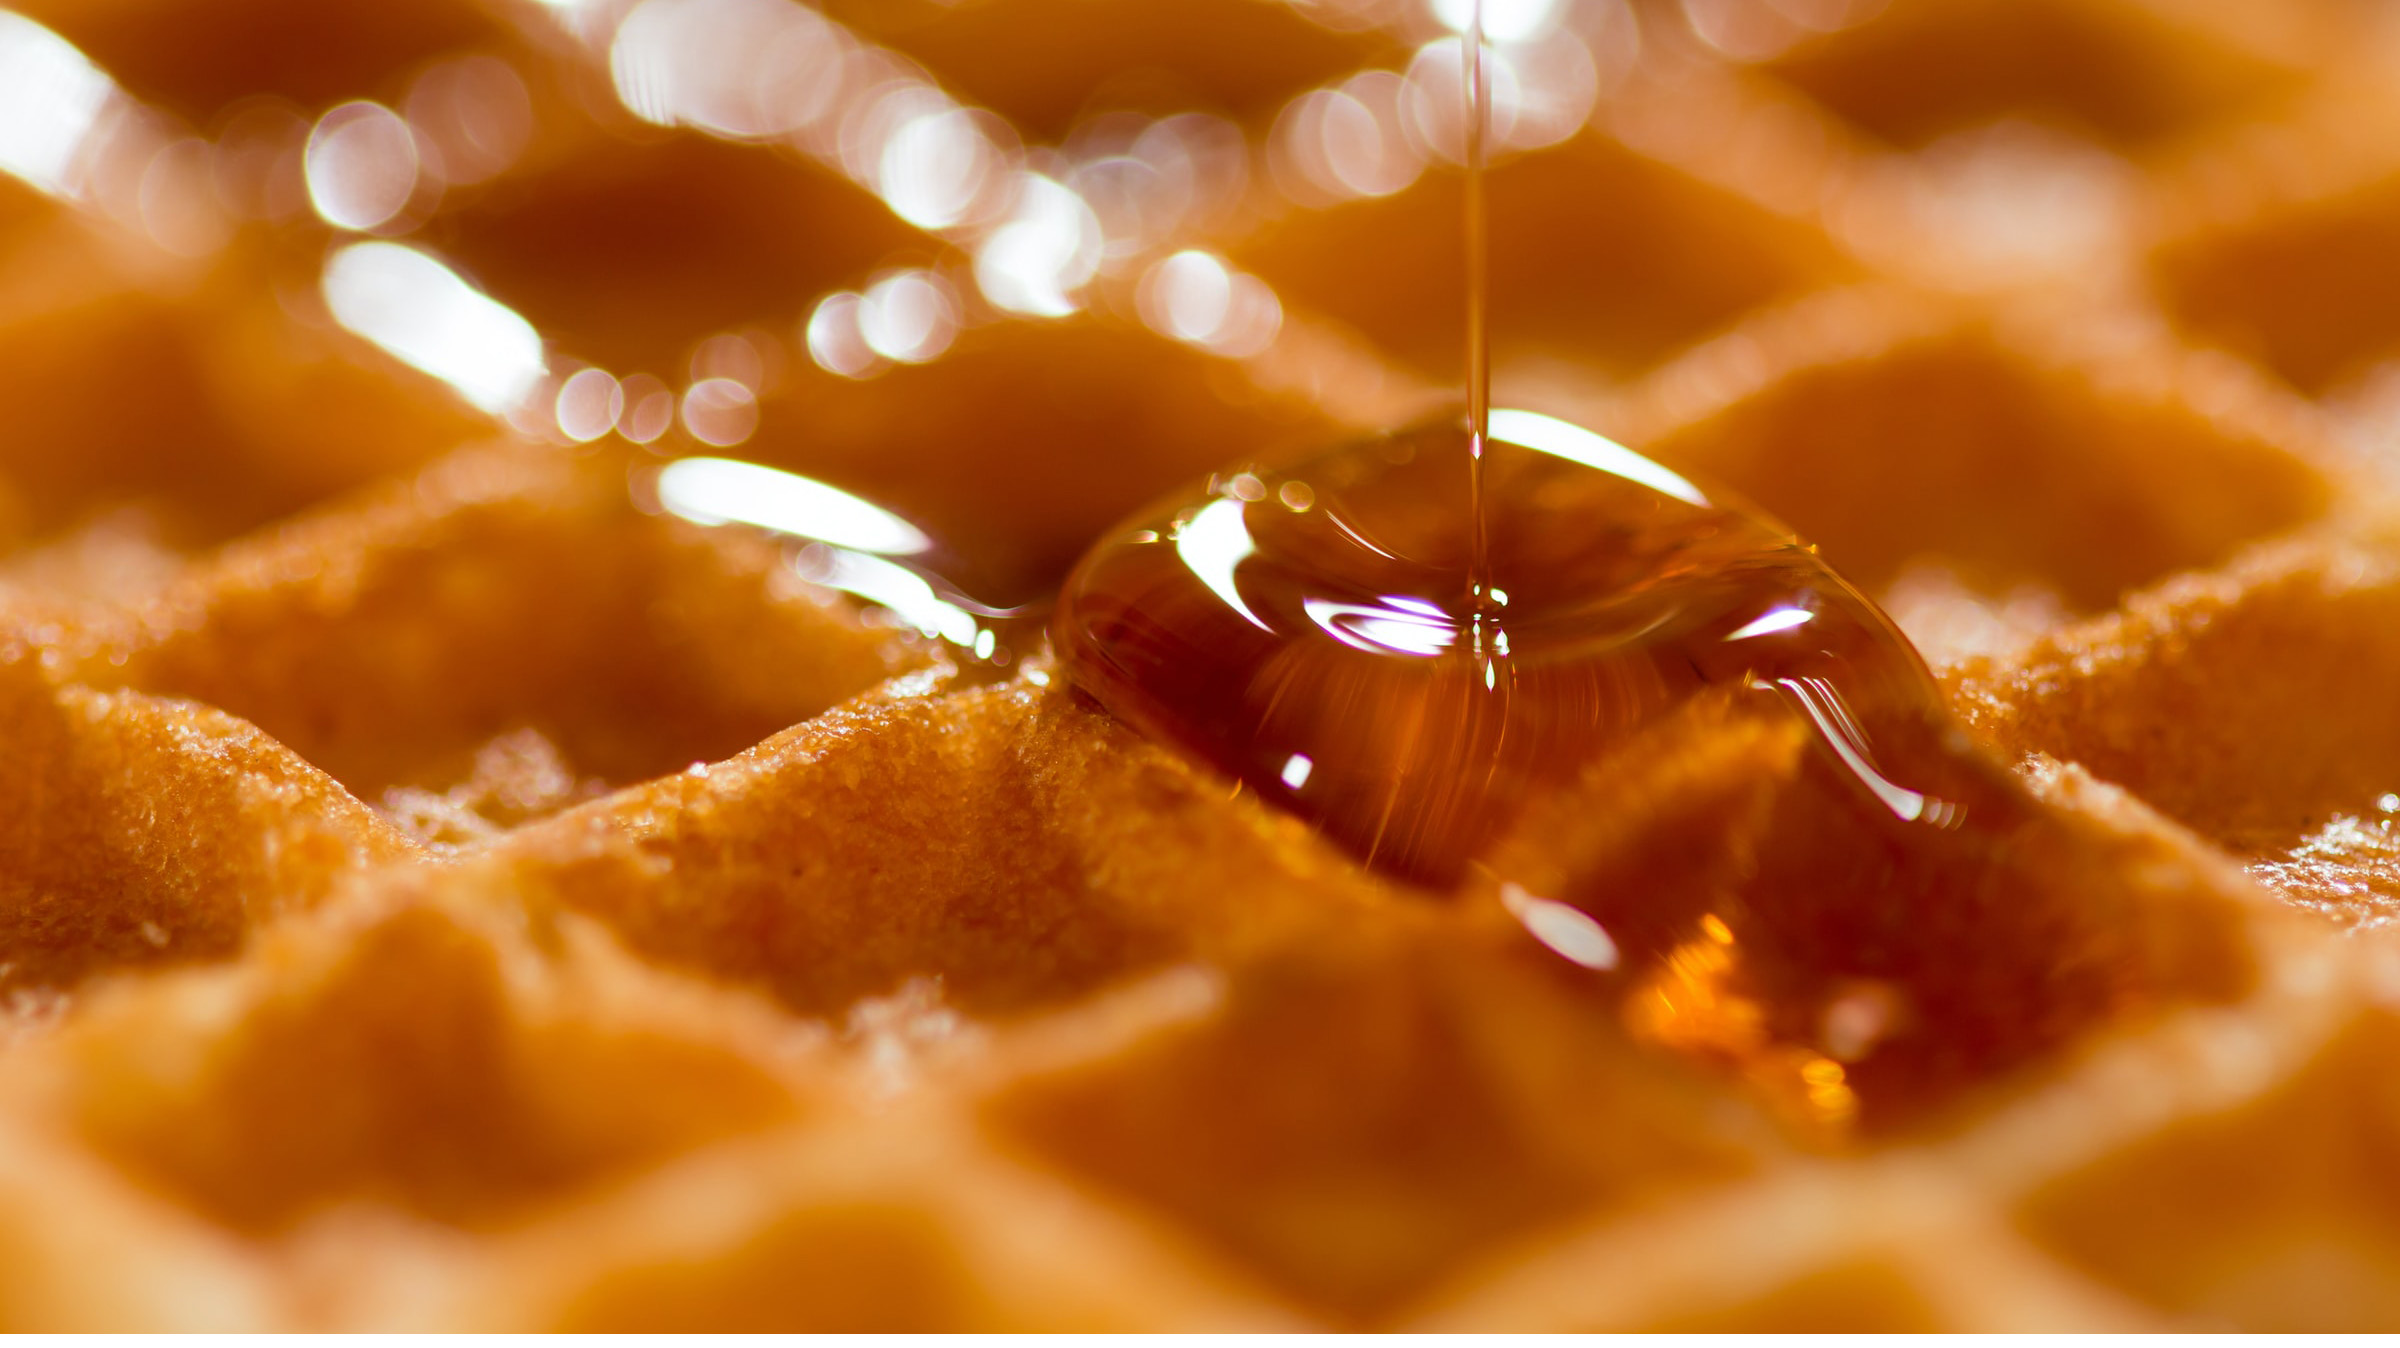 Packaged Honey may Contain More Than 50% Synthetic Sugar Syrup!